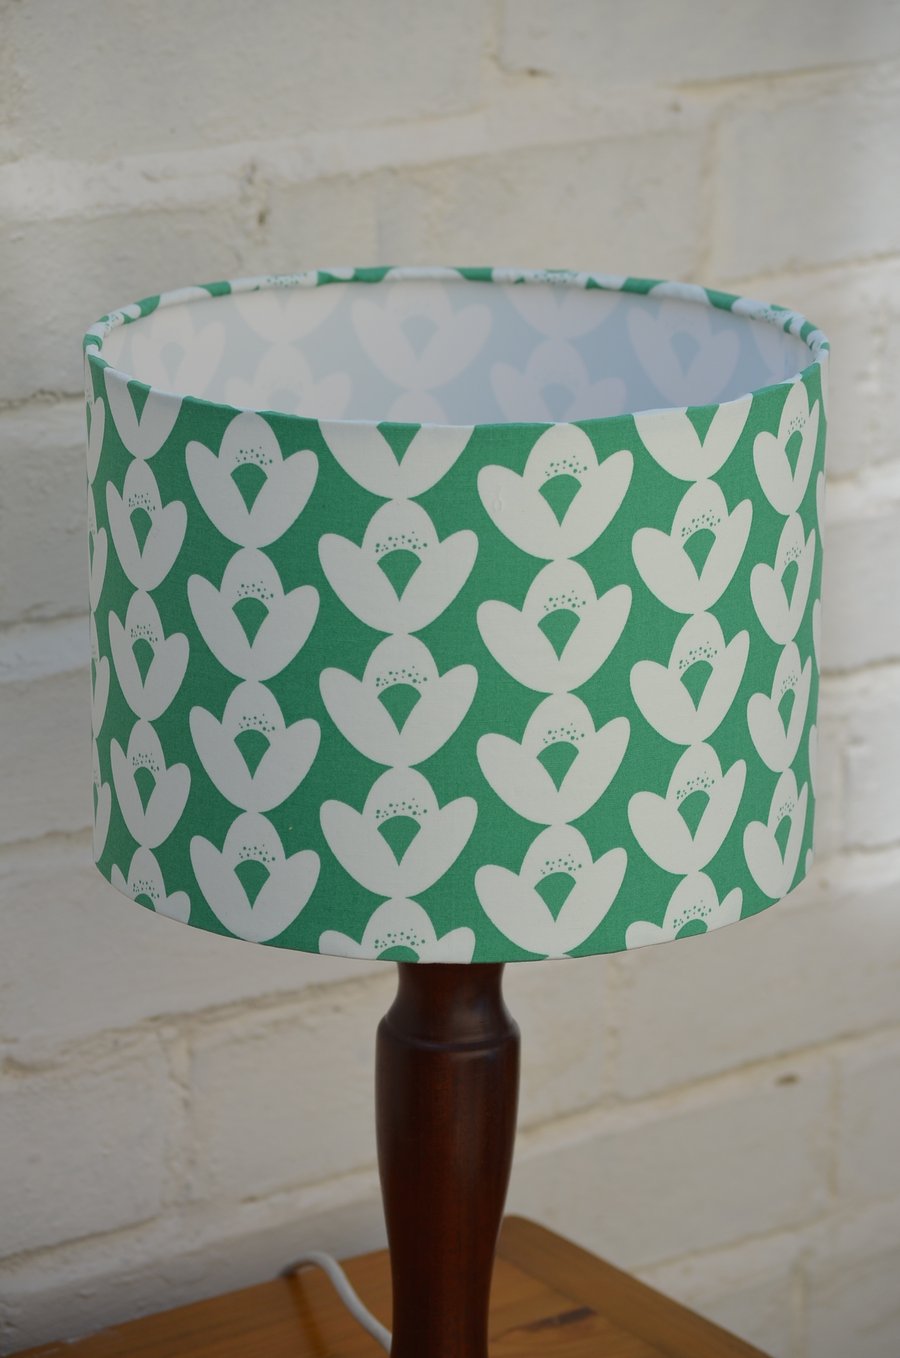 30cm Green and White Floral Lamp shade